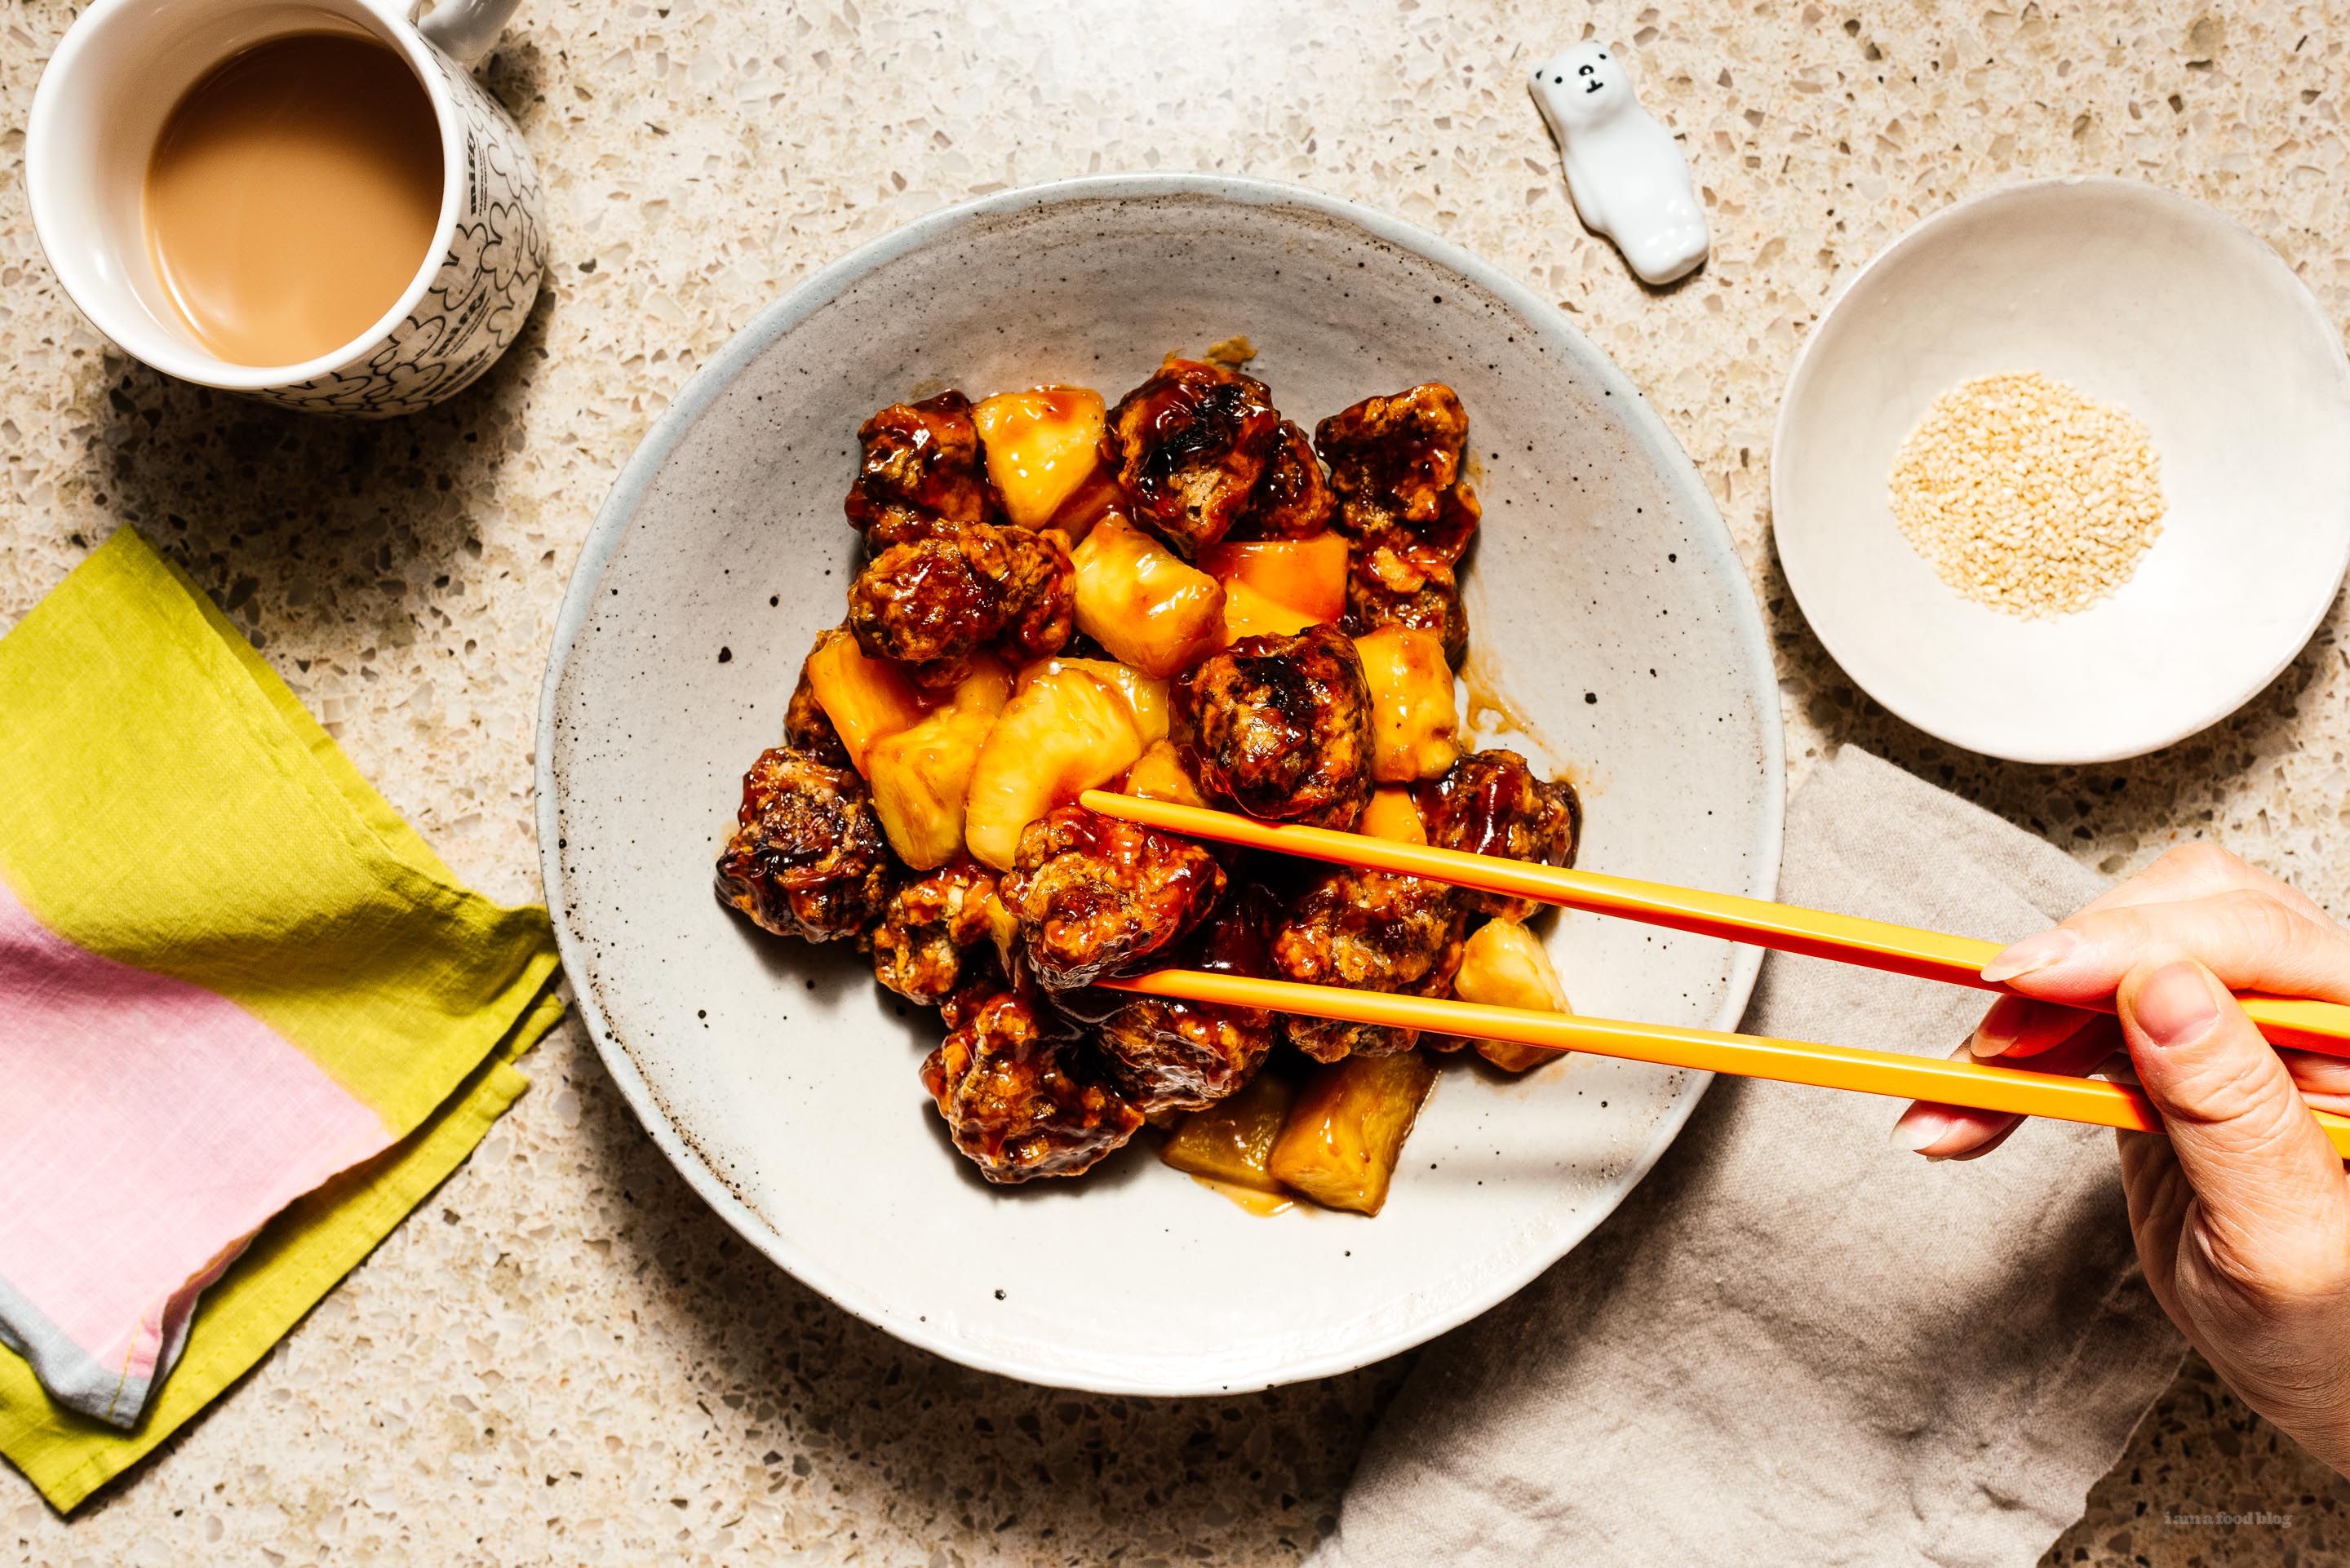 Chinese Take Out at Home: Sweet and Sour Pork Recipe